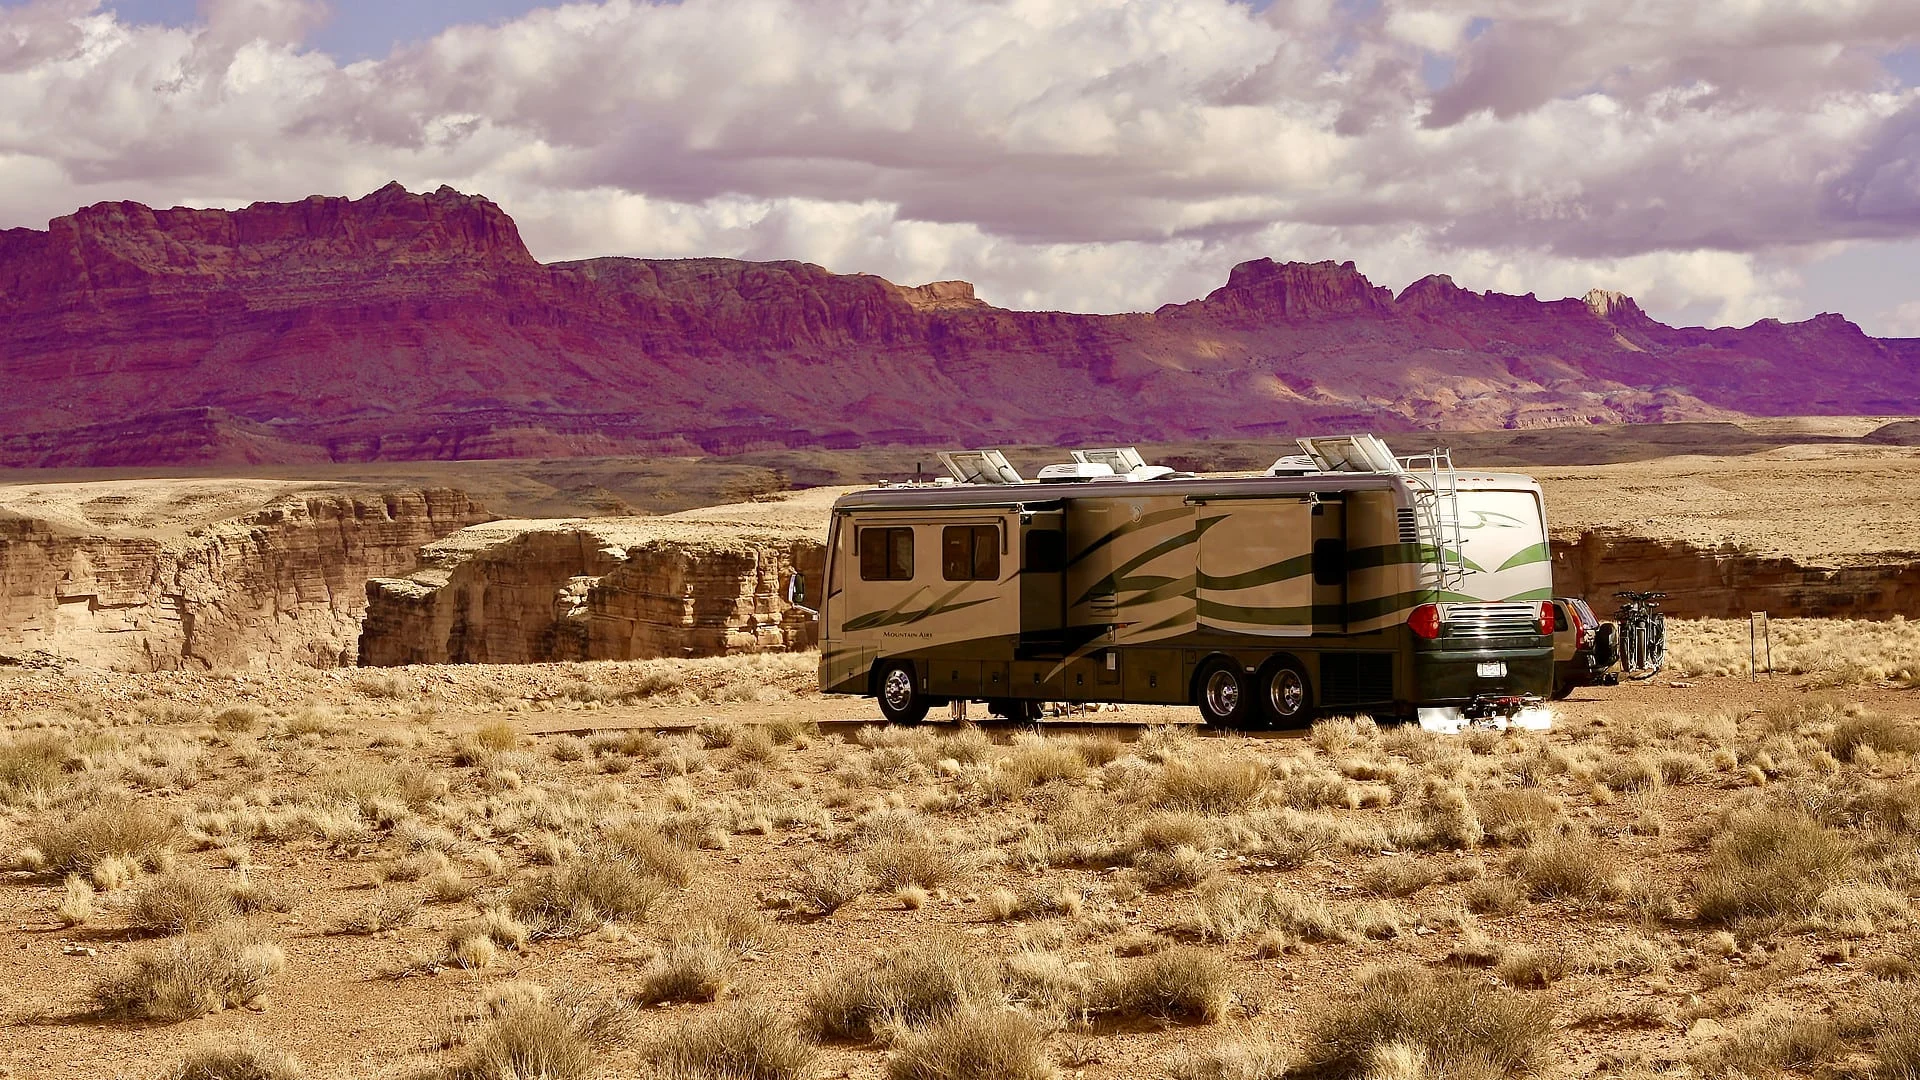 Our RV parked in a desert landscape while dry camping in Arizona.